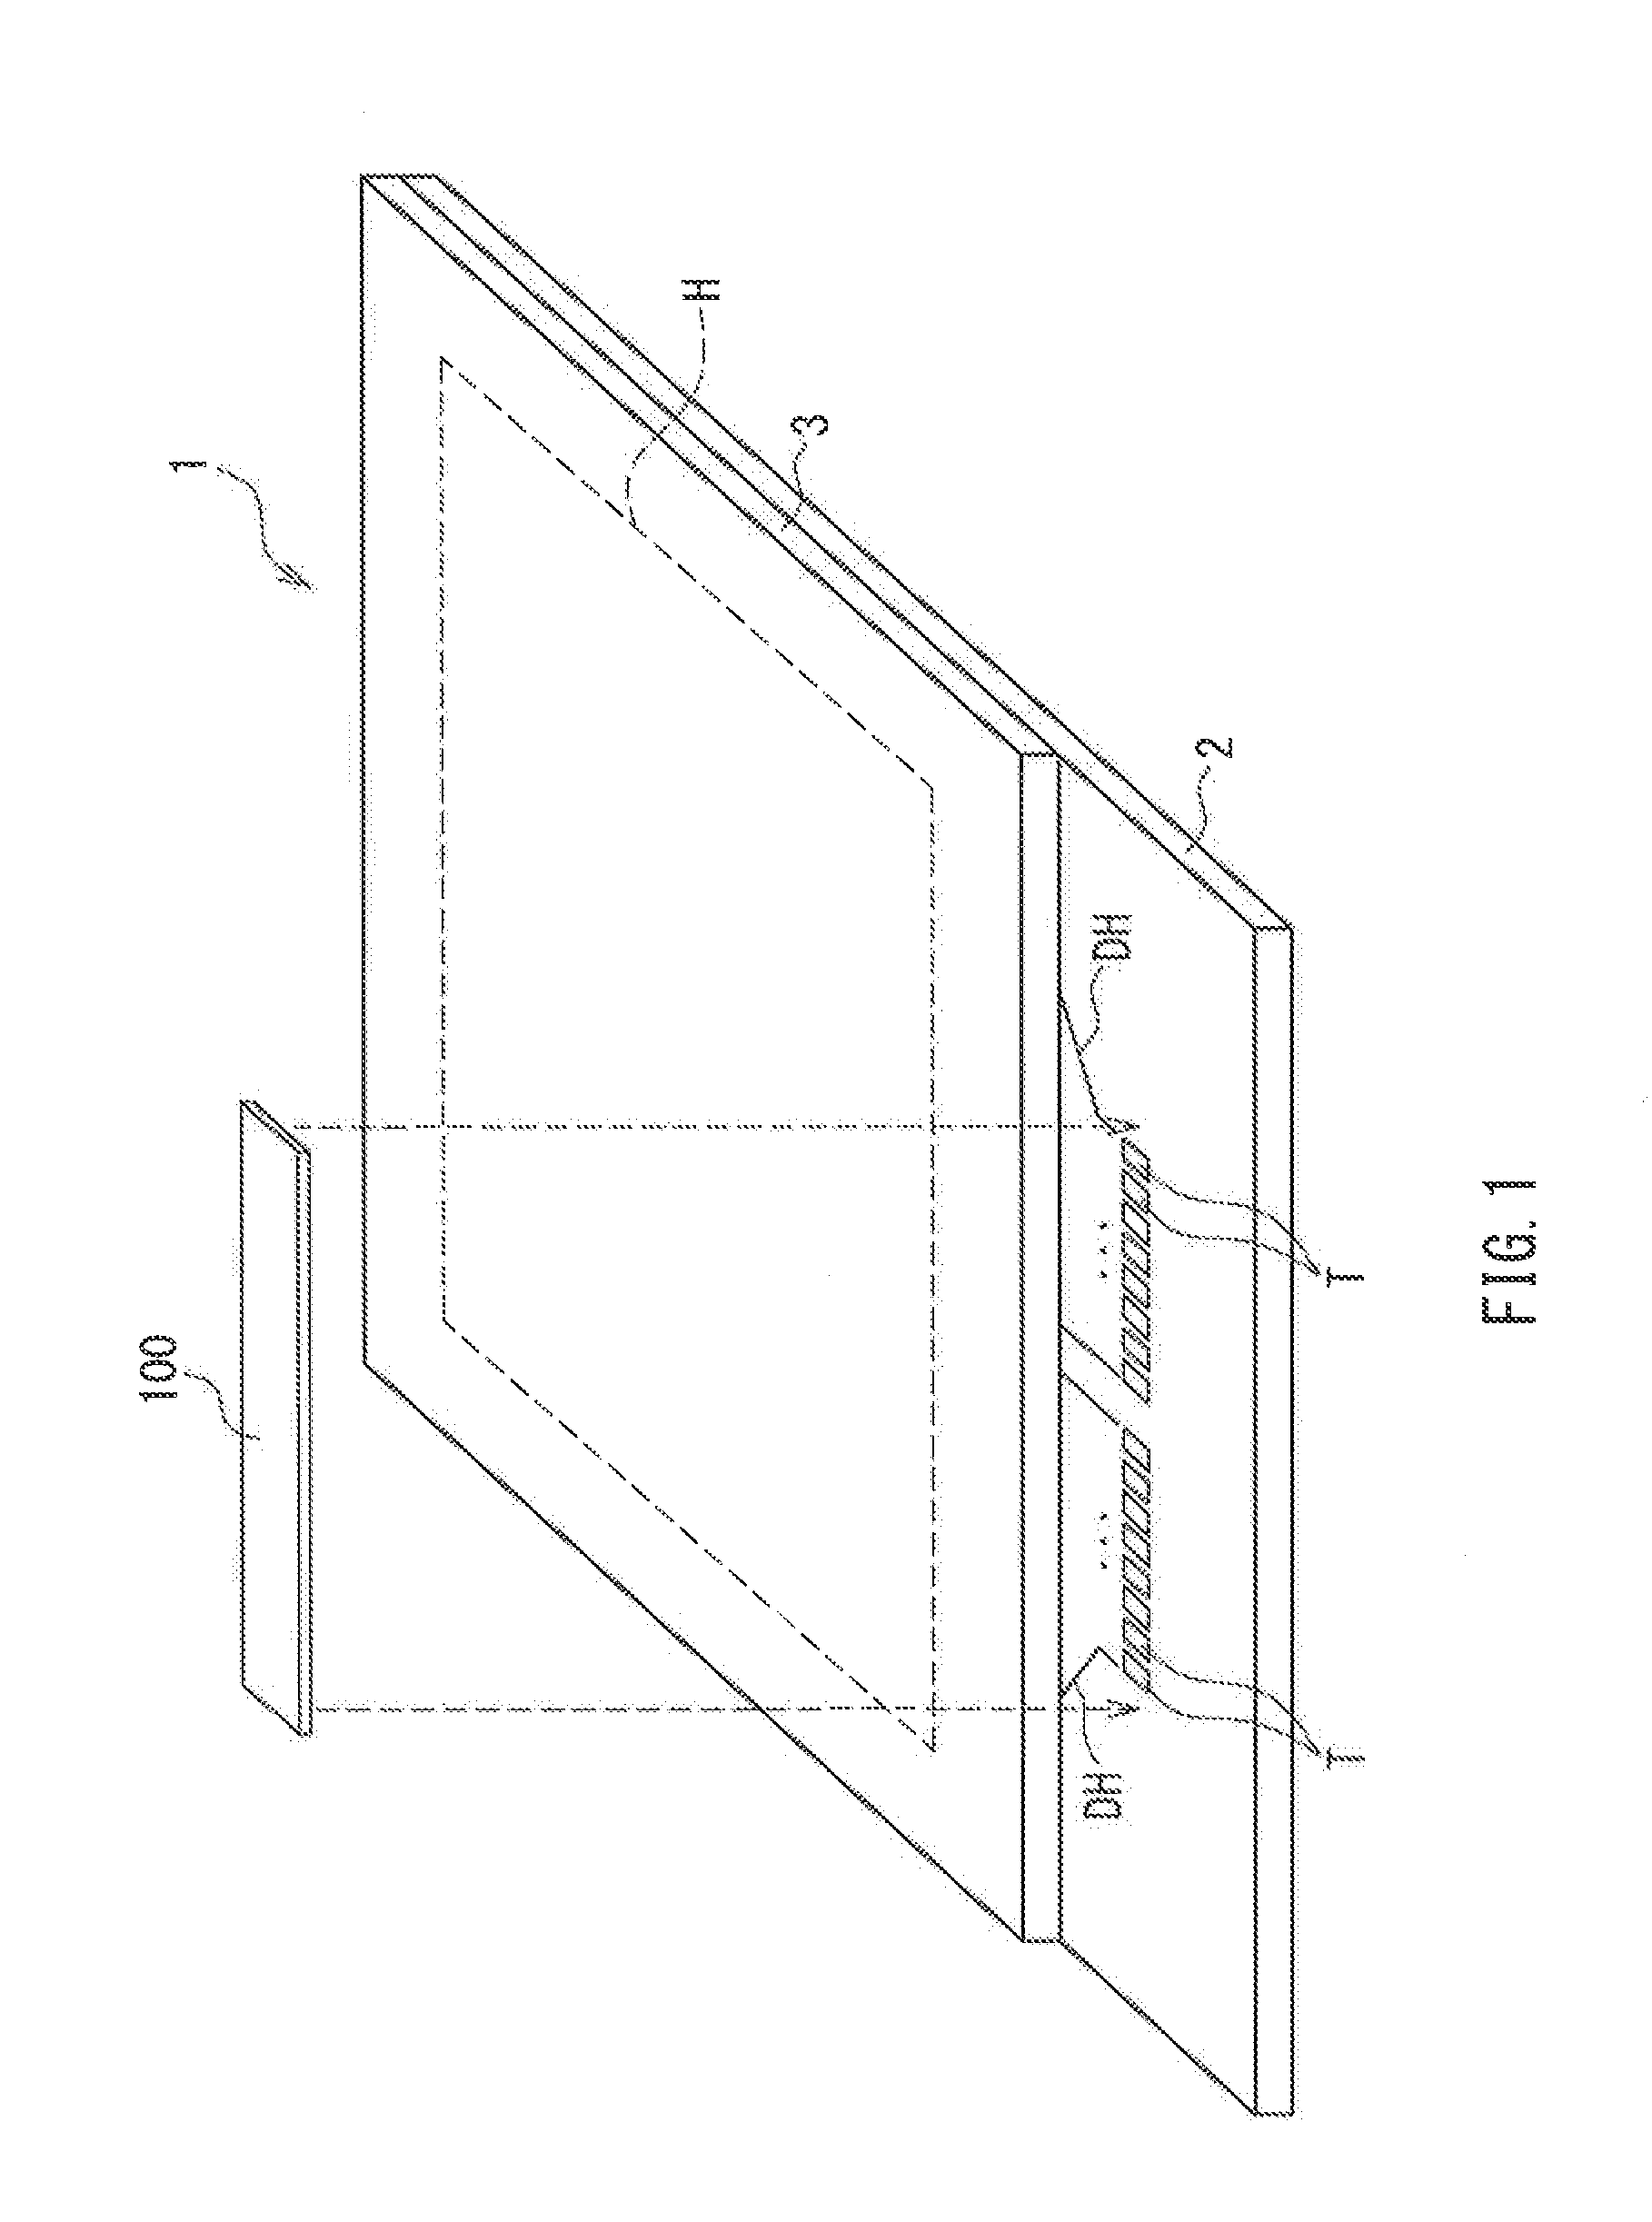 Active matrix substrate and display device